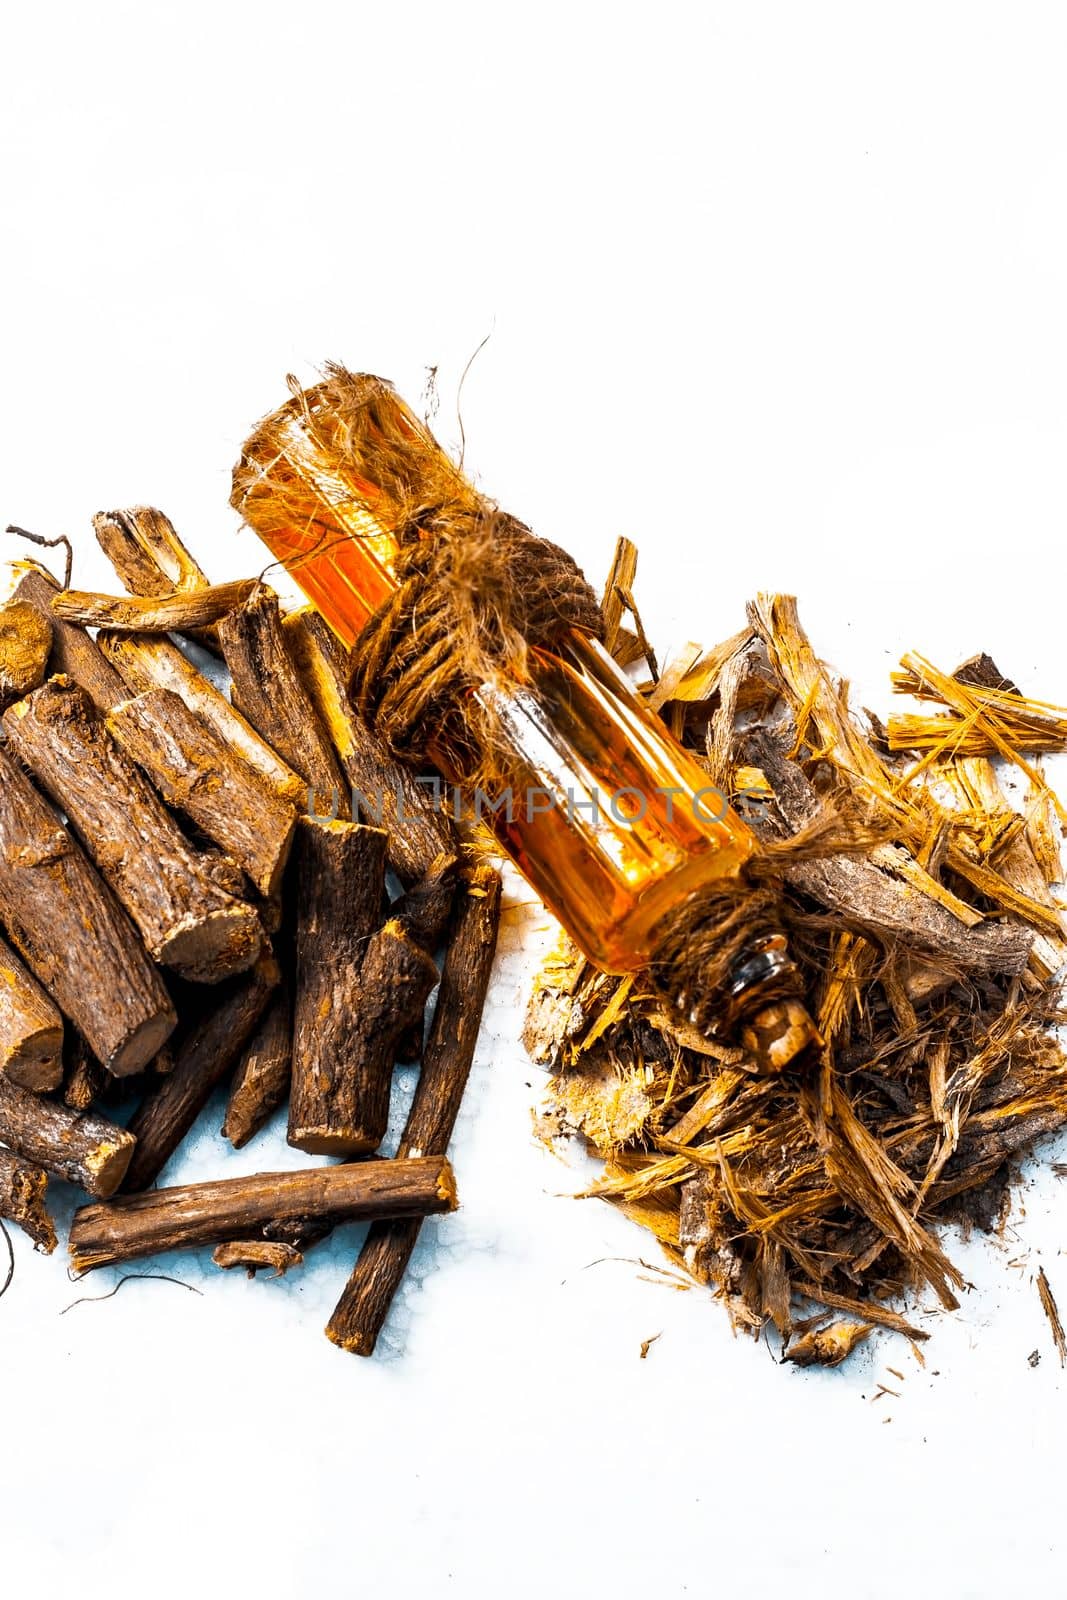 Ayurvedic herb Liquorice root,Licorice root, Mulethi or Glycyrrhiza glabra root and its powder with its oil for detoxifying the body, soothing spasms, easing menstrual cramps, raising blood pressure. by mirzamlk